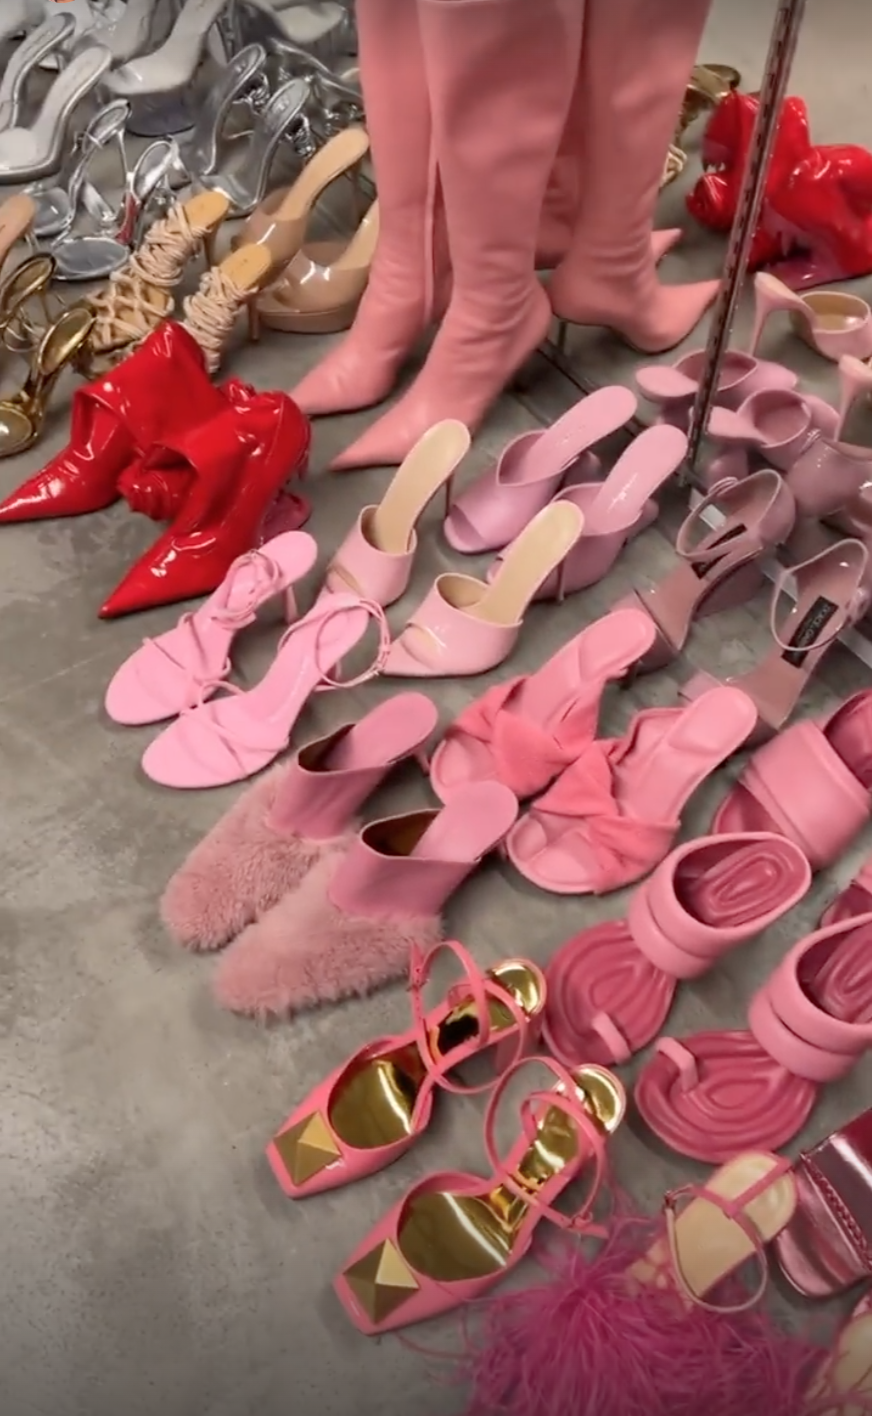 FULL VIDEO] Kylie Jenner, My Closet Tour, Bags and Shoes Collection